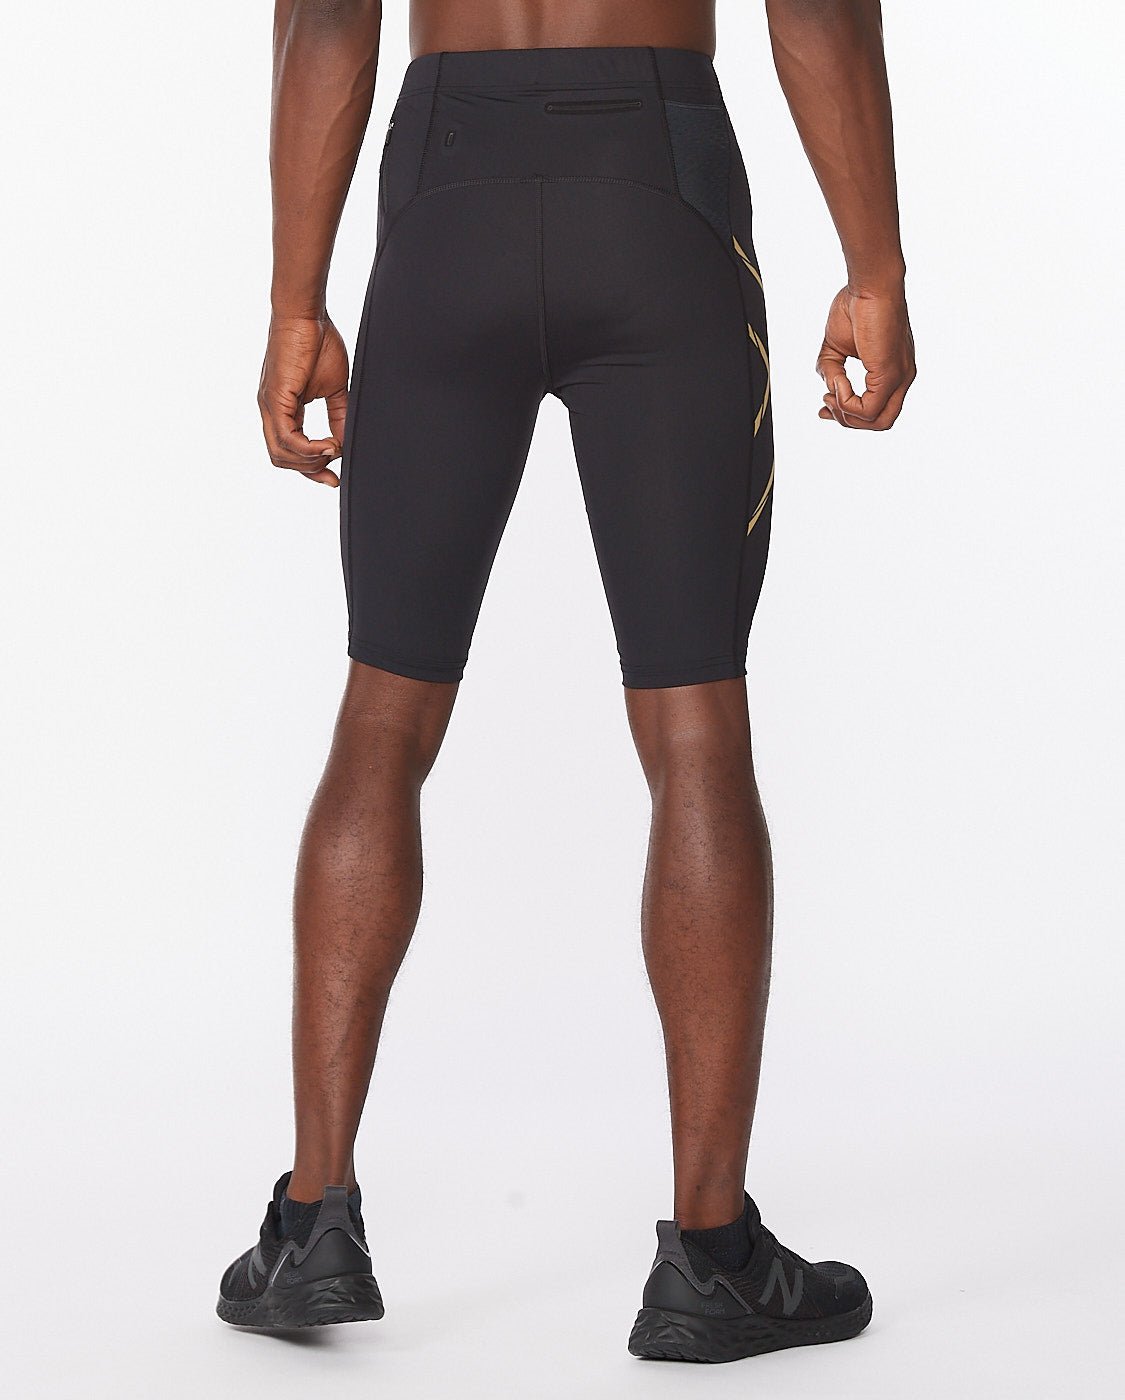 2XU South Africa - Men's Light Speed Compression Shorts - Black/Gold Reflective